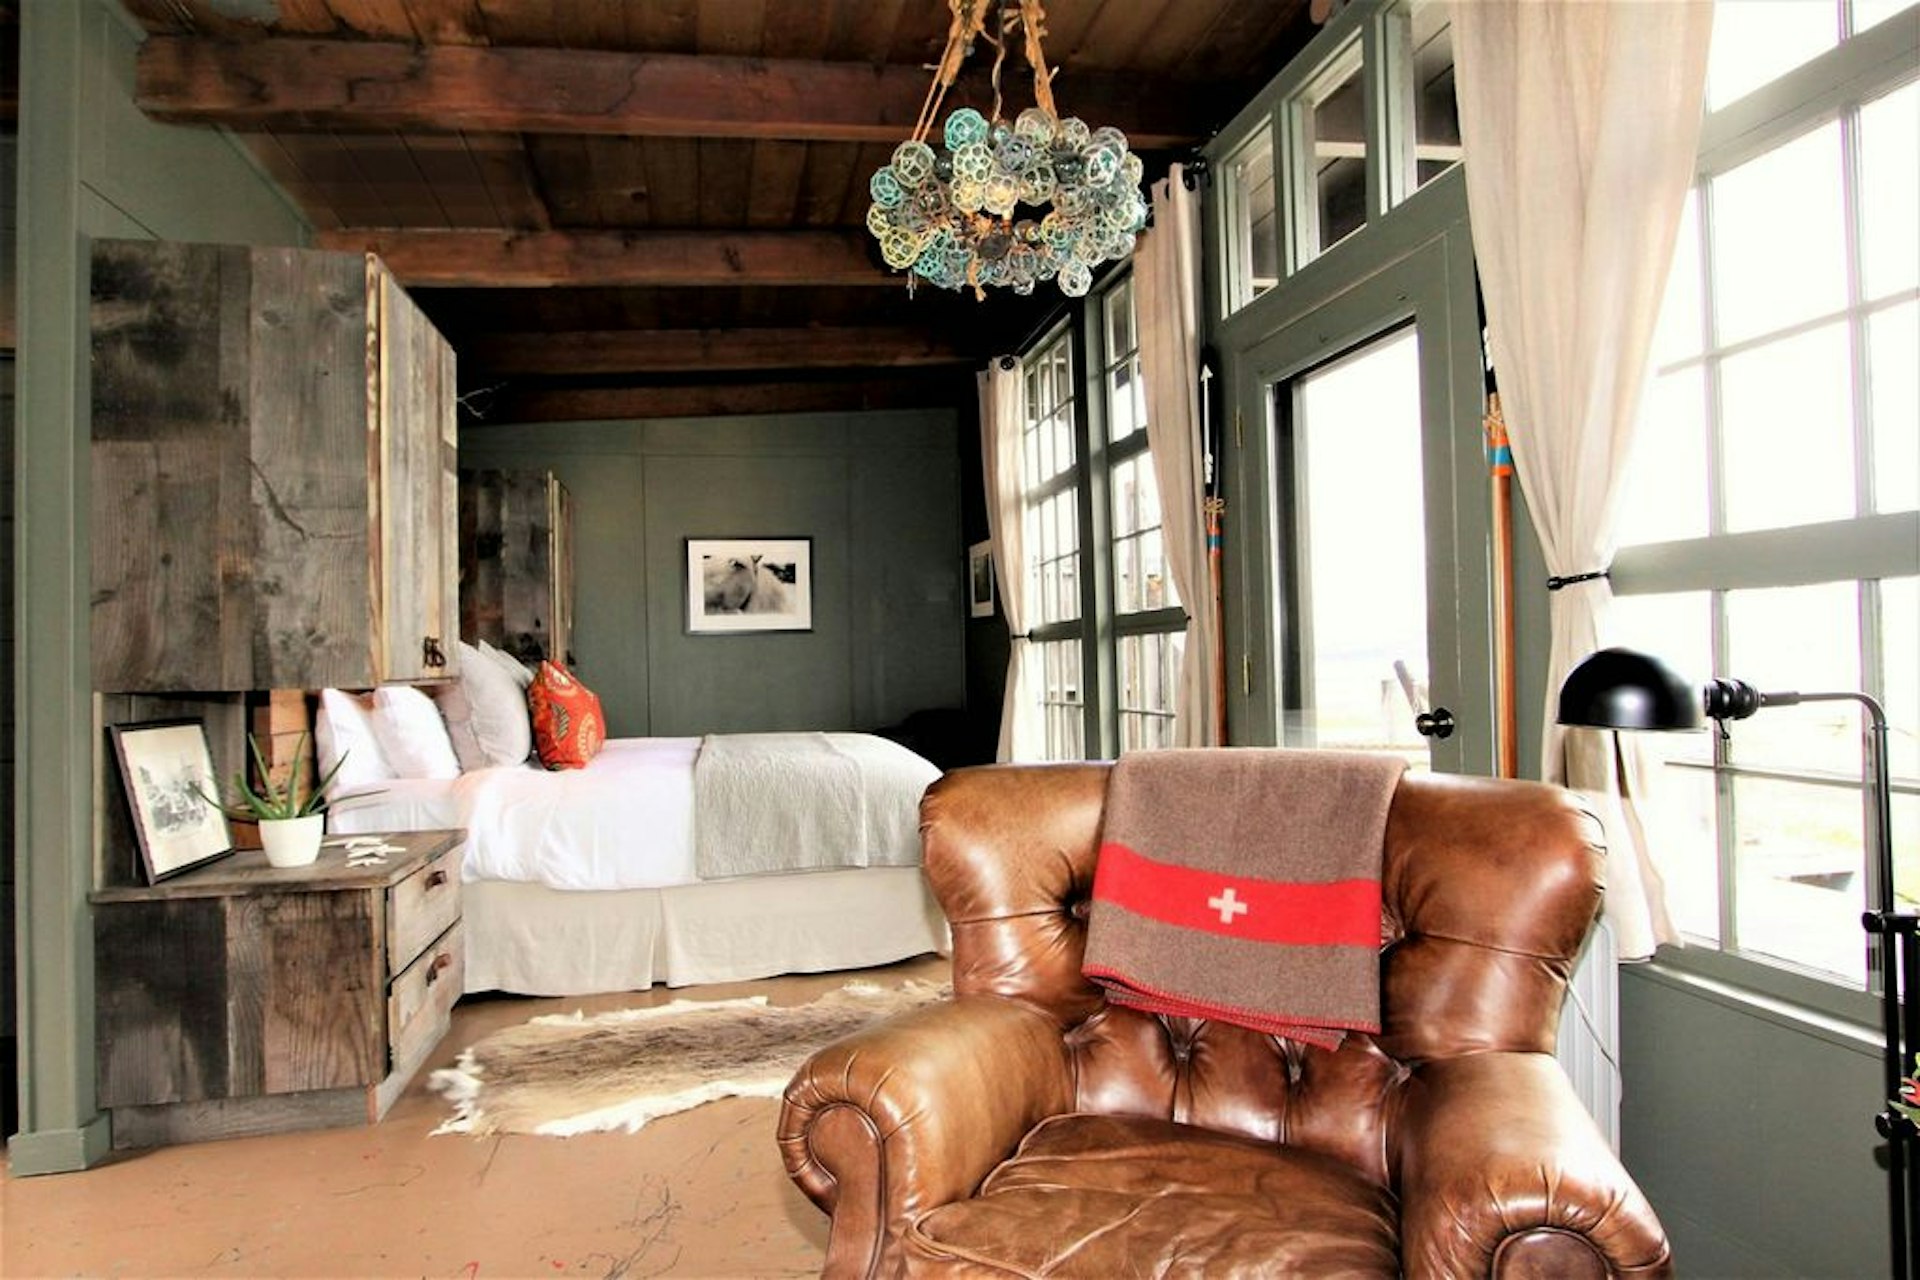 A rustic bedroom with a high beamed ceiling, soft leather armchair in the foreground and a wall of windows on the right that the bed overlooks.